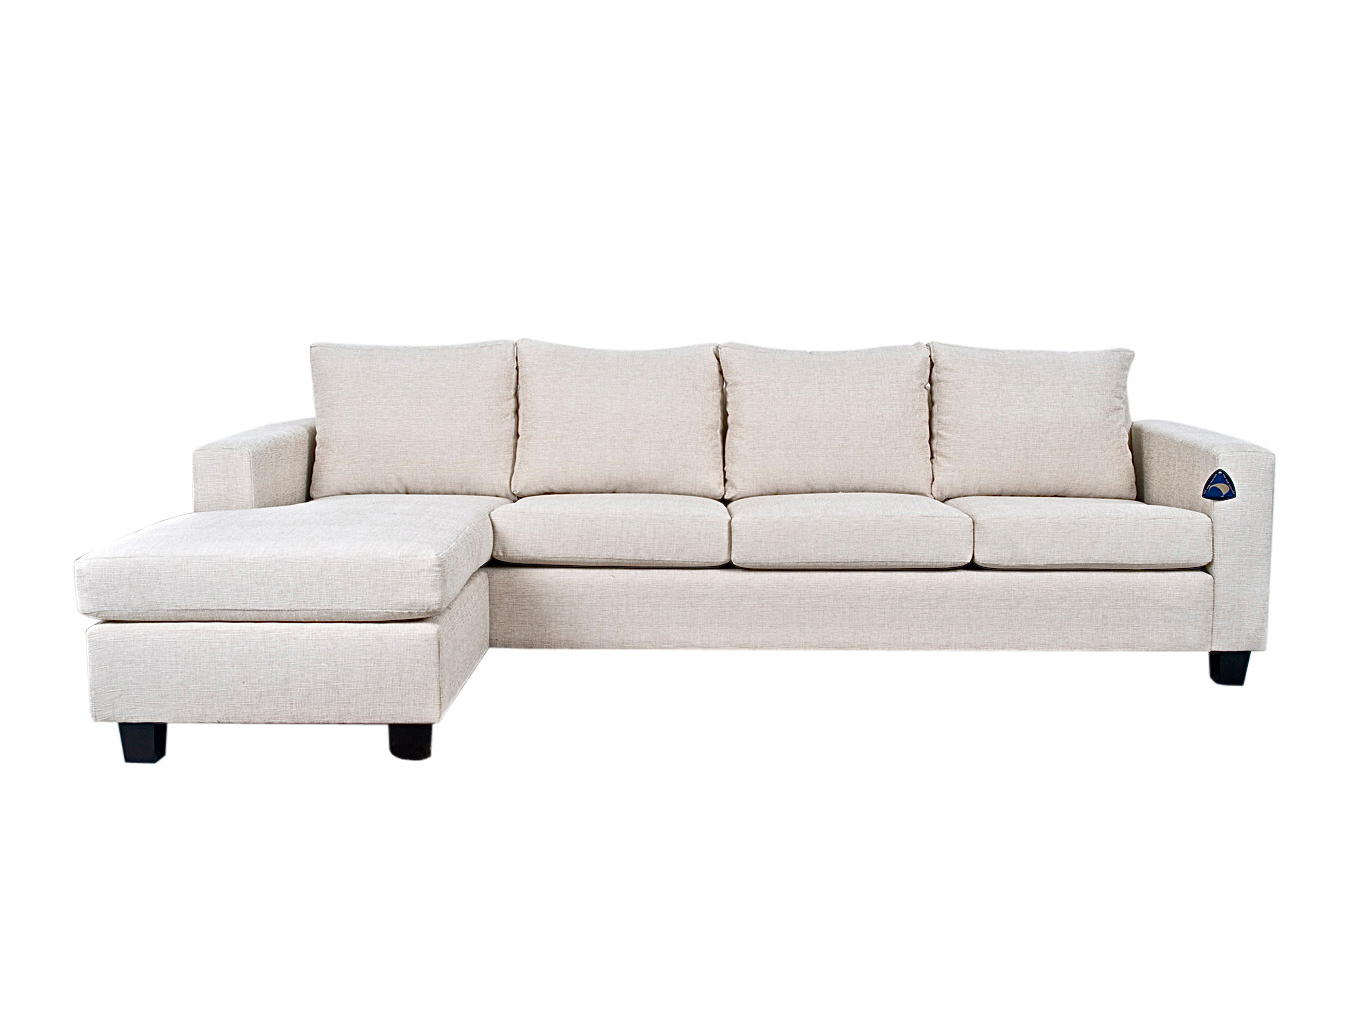 Lucca 4 Seater Chaise